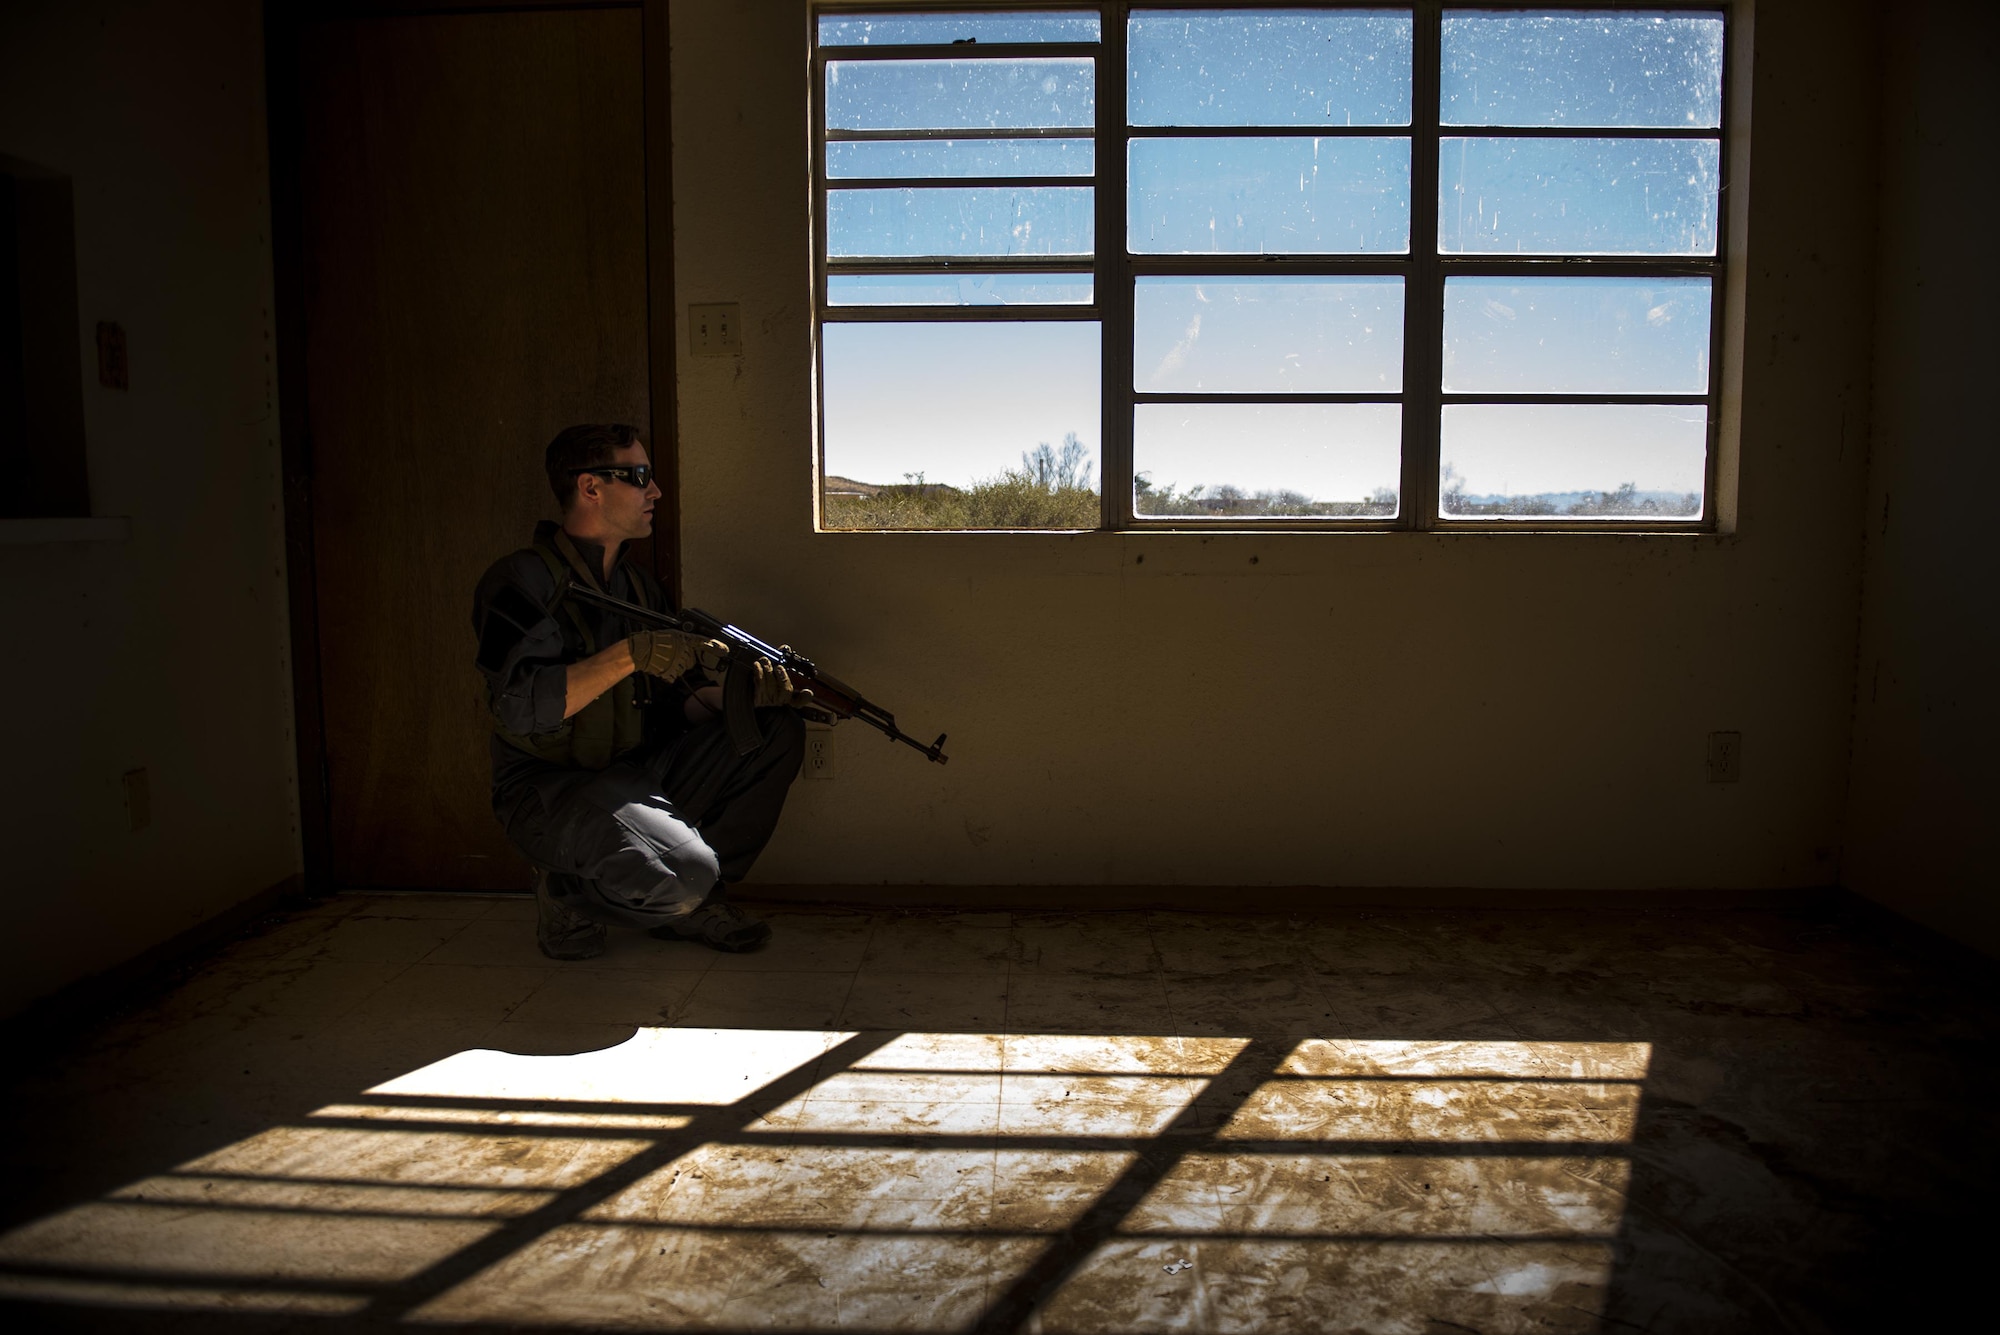 Staff Sgt. Eric Fullmer, 563d Operations Support Squadron, scans through a window while acting as an oppositional force member, Feb. 22, 2017, at the Playas Training and Research Center, N.M. OPFOR is a role designed to simulate downrange threats and complicate training objectives with the ultimate goal of creating a realistic training environment for units preparing to deploy. Airmen from the 563d OSS fill this role in support of numerous joint exercises each year utilizing aircraft-threat emittors, vehicle-mounted simulation weapons and waves of ground troops. (U.S. Air Force photo by Staff Sgt. Ryan Callaghan)